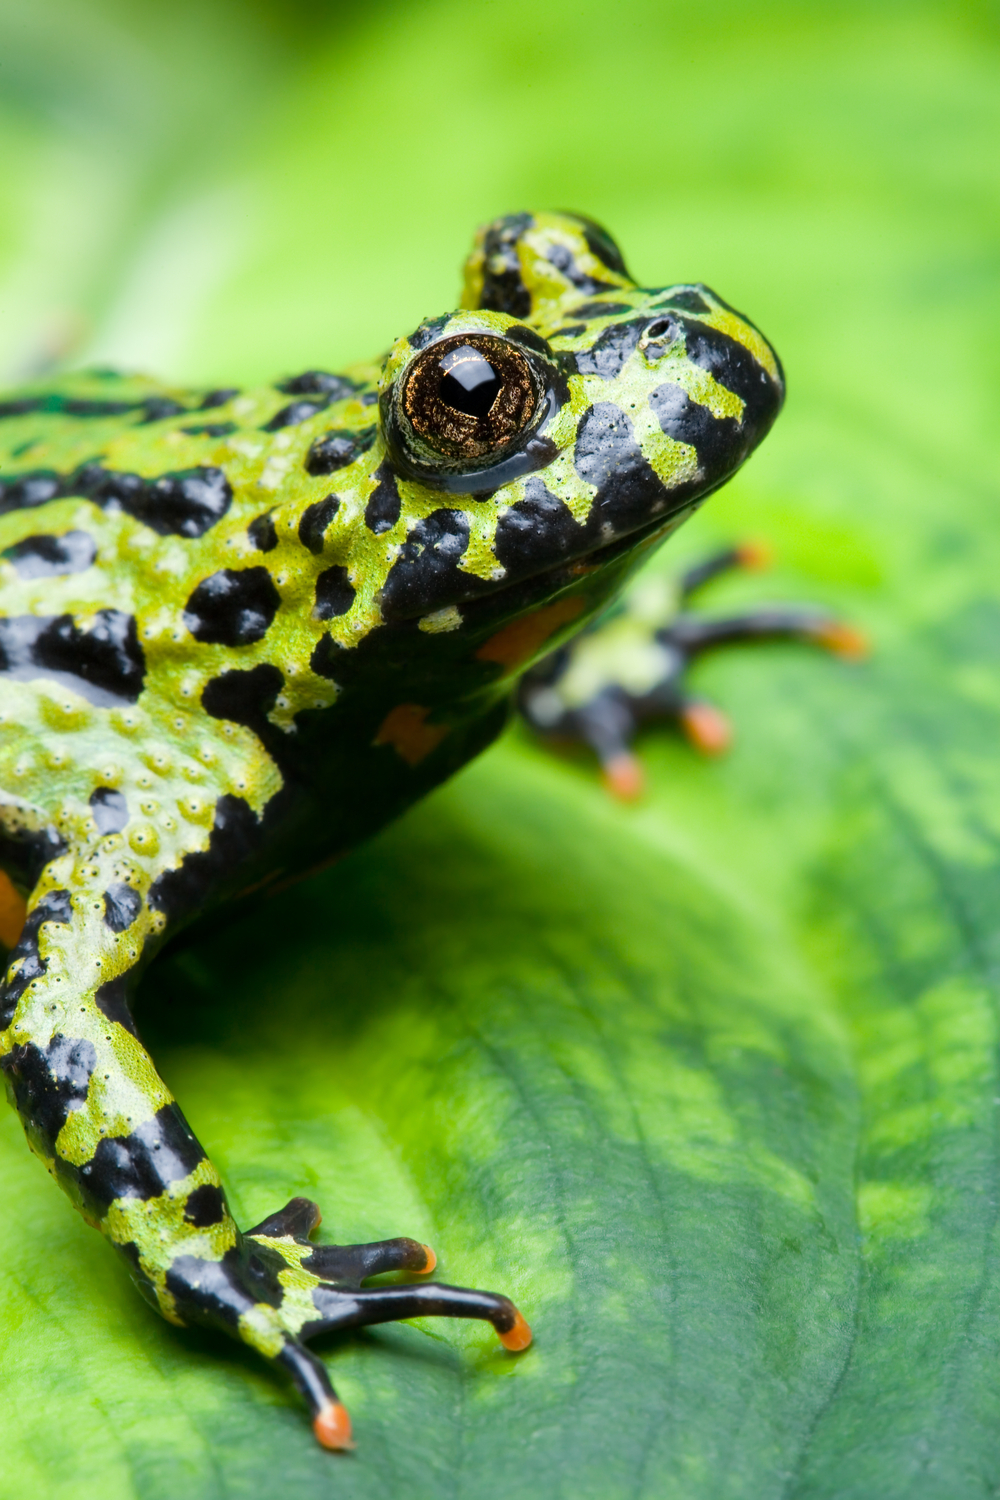 Fire Belly Toad’s Habits and Biology